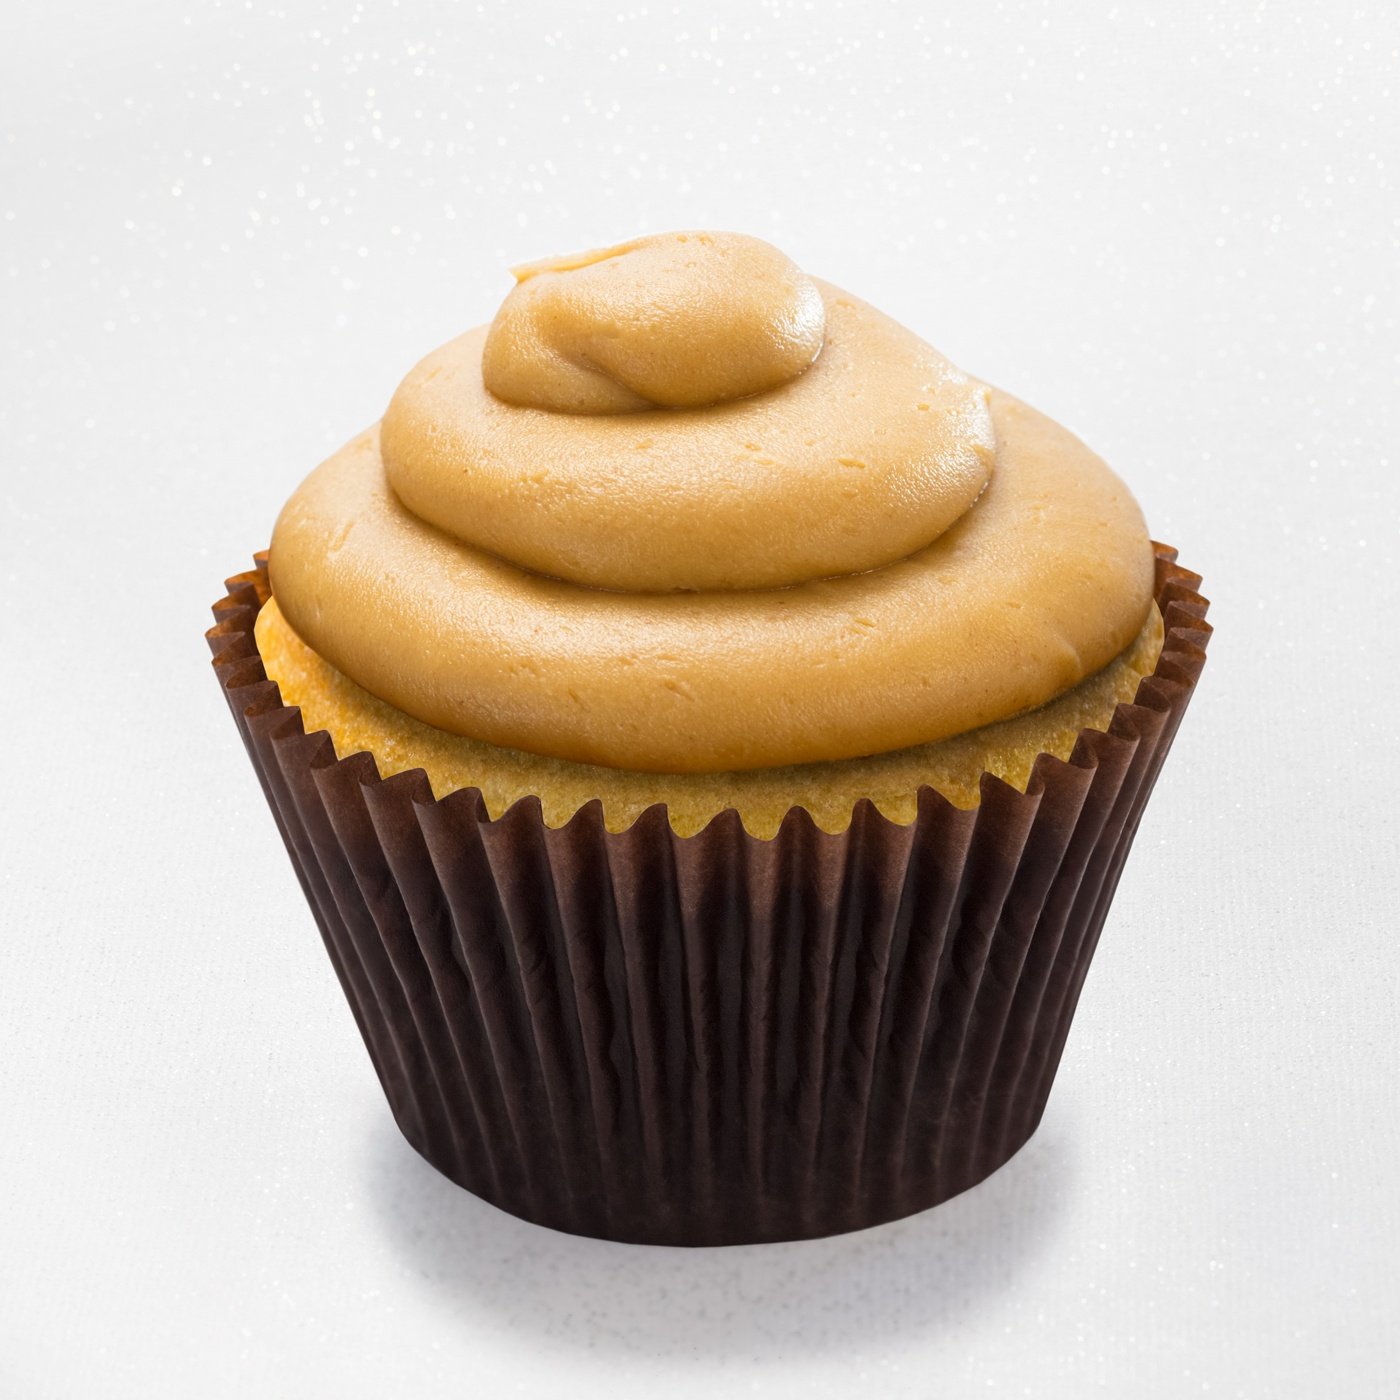 Peanut butter cupcake with peanut butter mousse